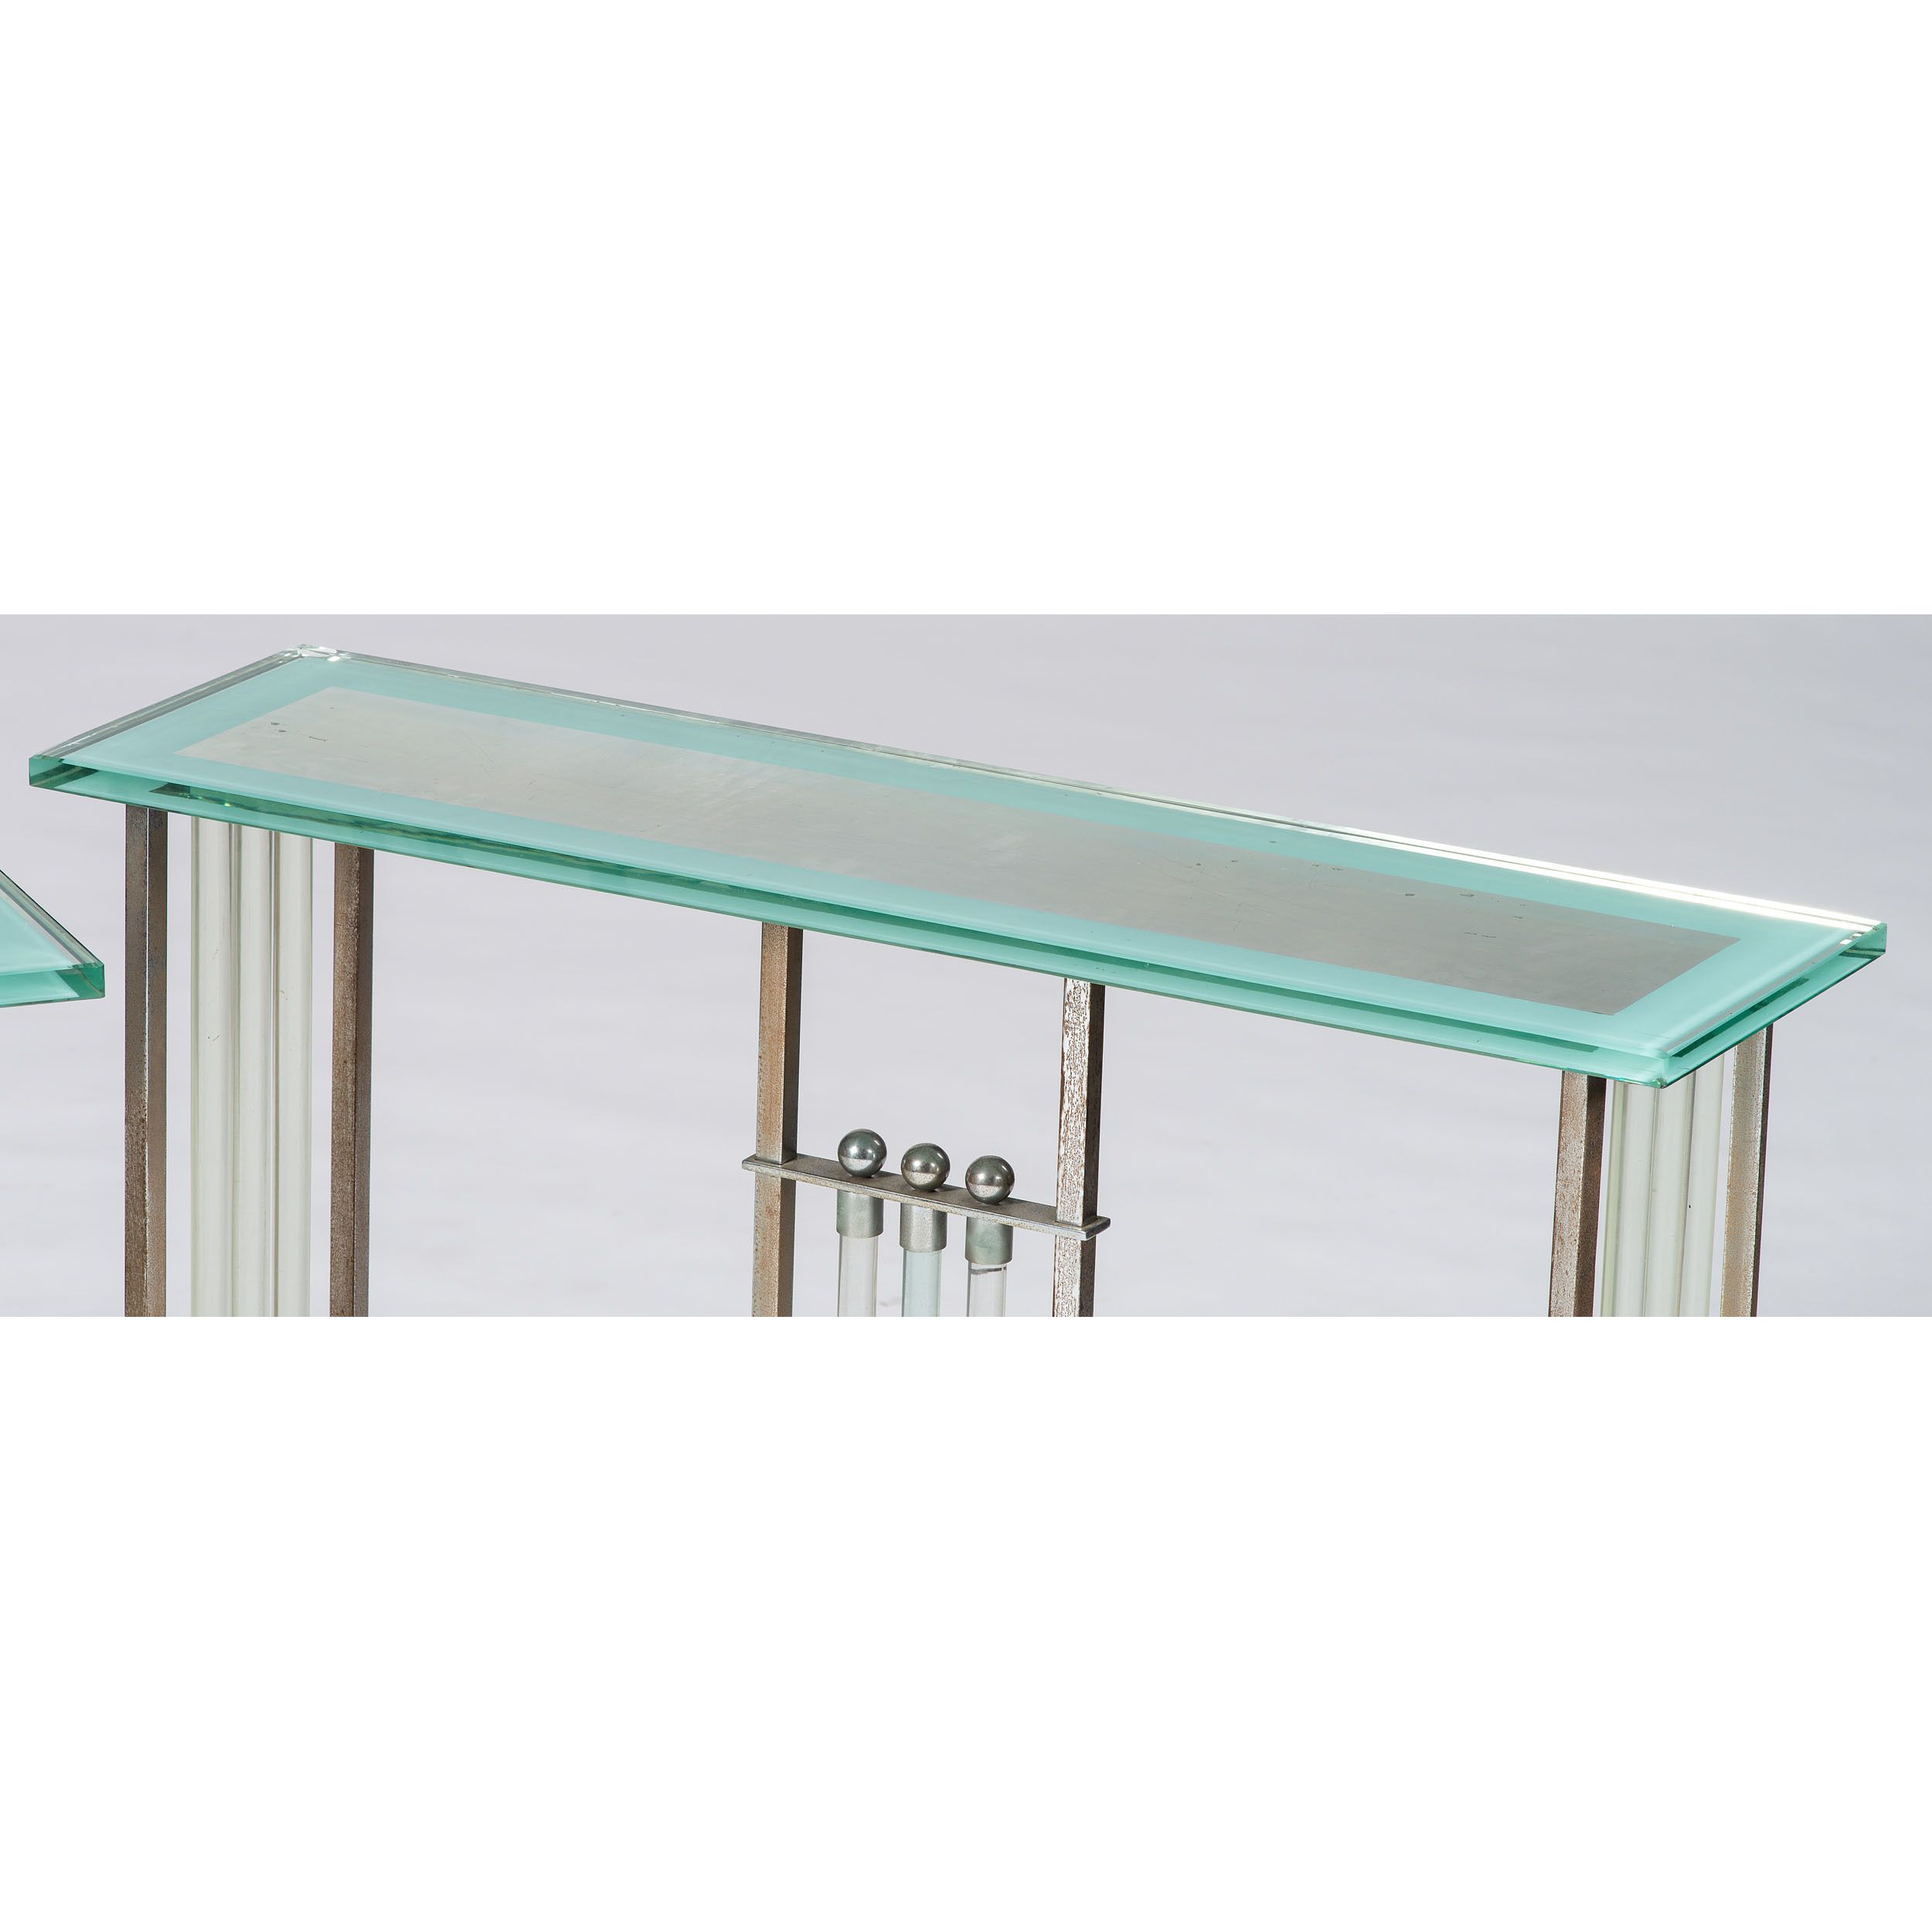 Contemporary Chrome And Glass Console Tables | Cowan's Auction House Throughout Glass And Chrome Console Tables (View 10 of 20)